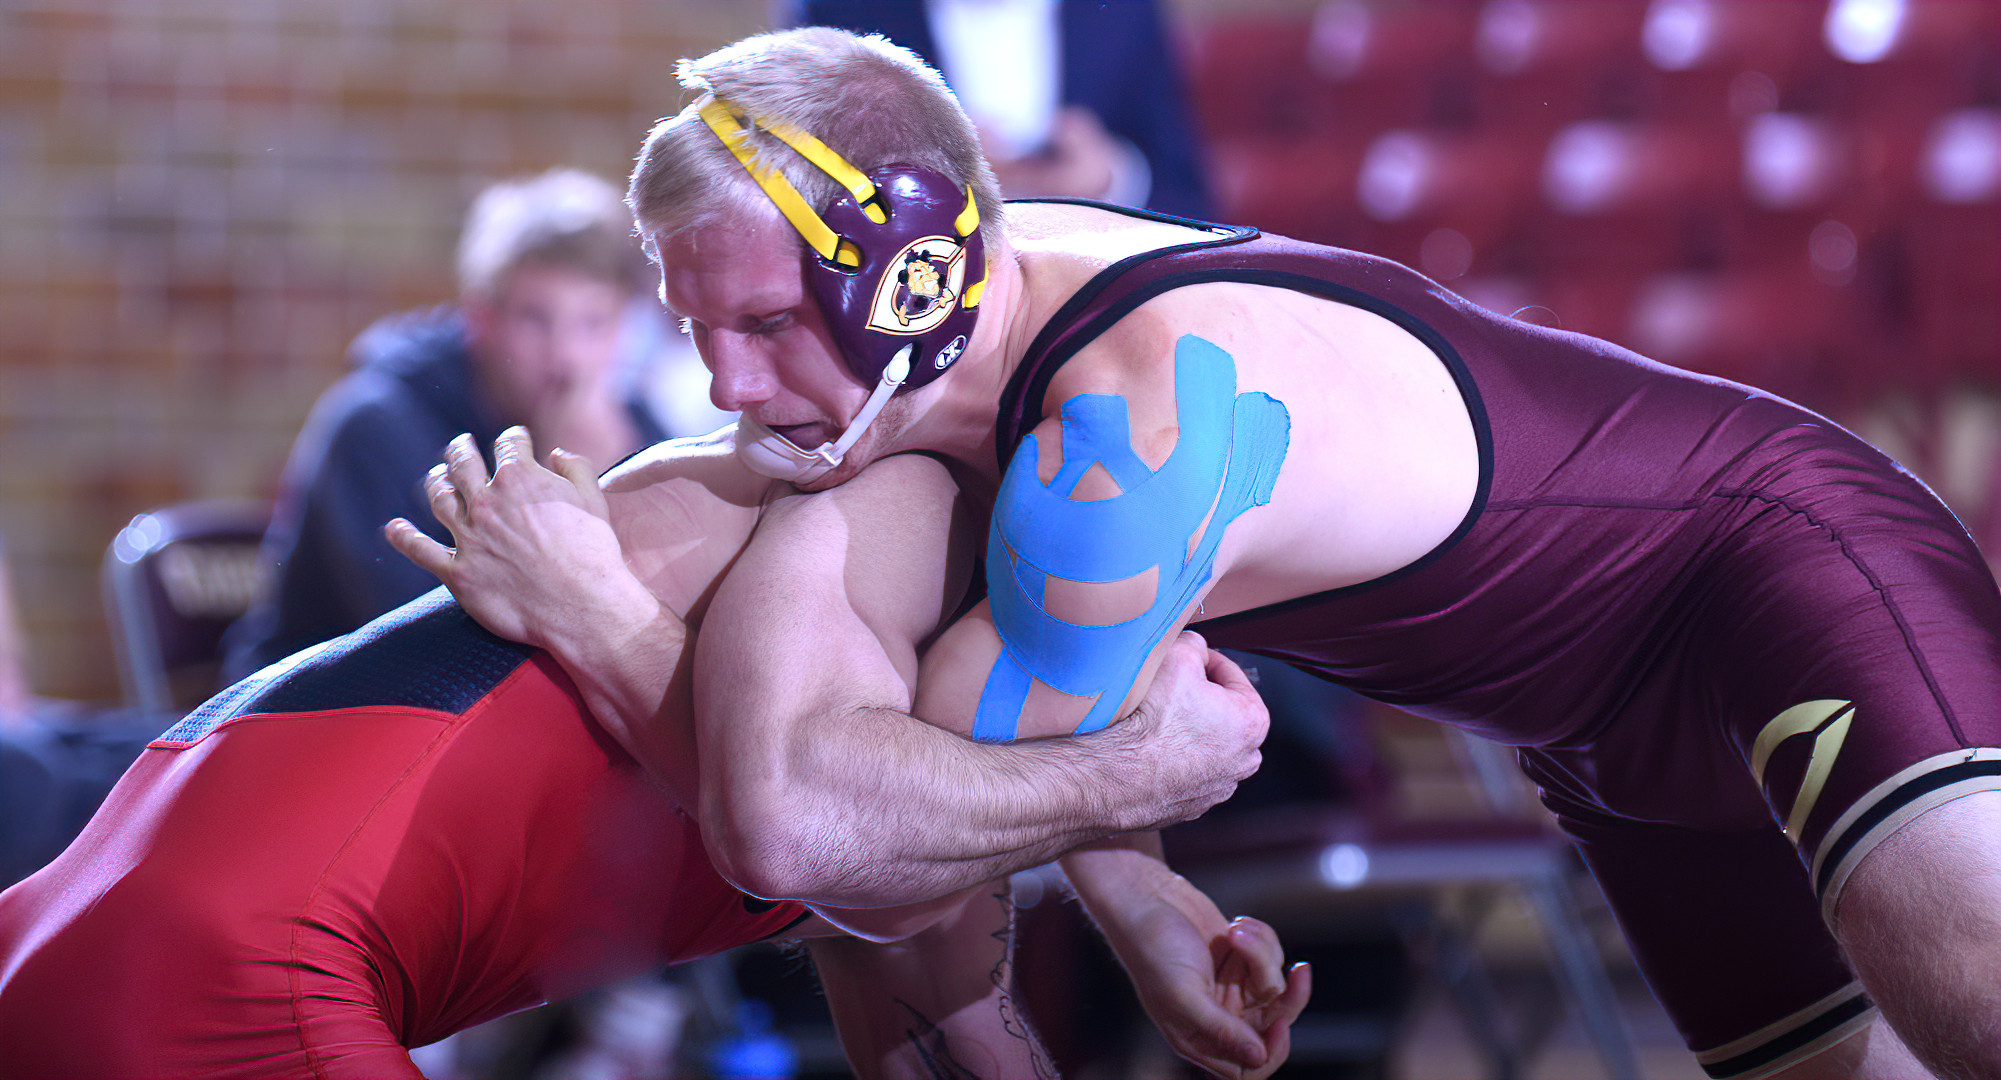 Junior Gabe Zierden was one of seven Cobbers who earned podium finishes at the NCAA Upper Midwest Regional Meet. He placed fourth at 197.